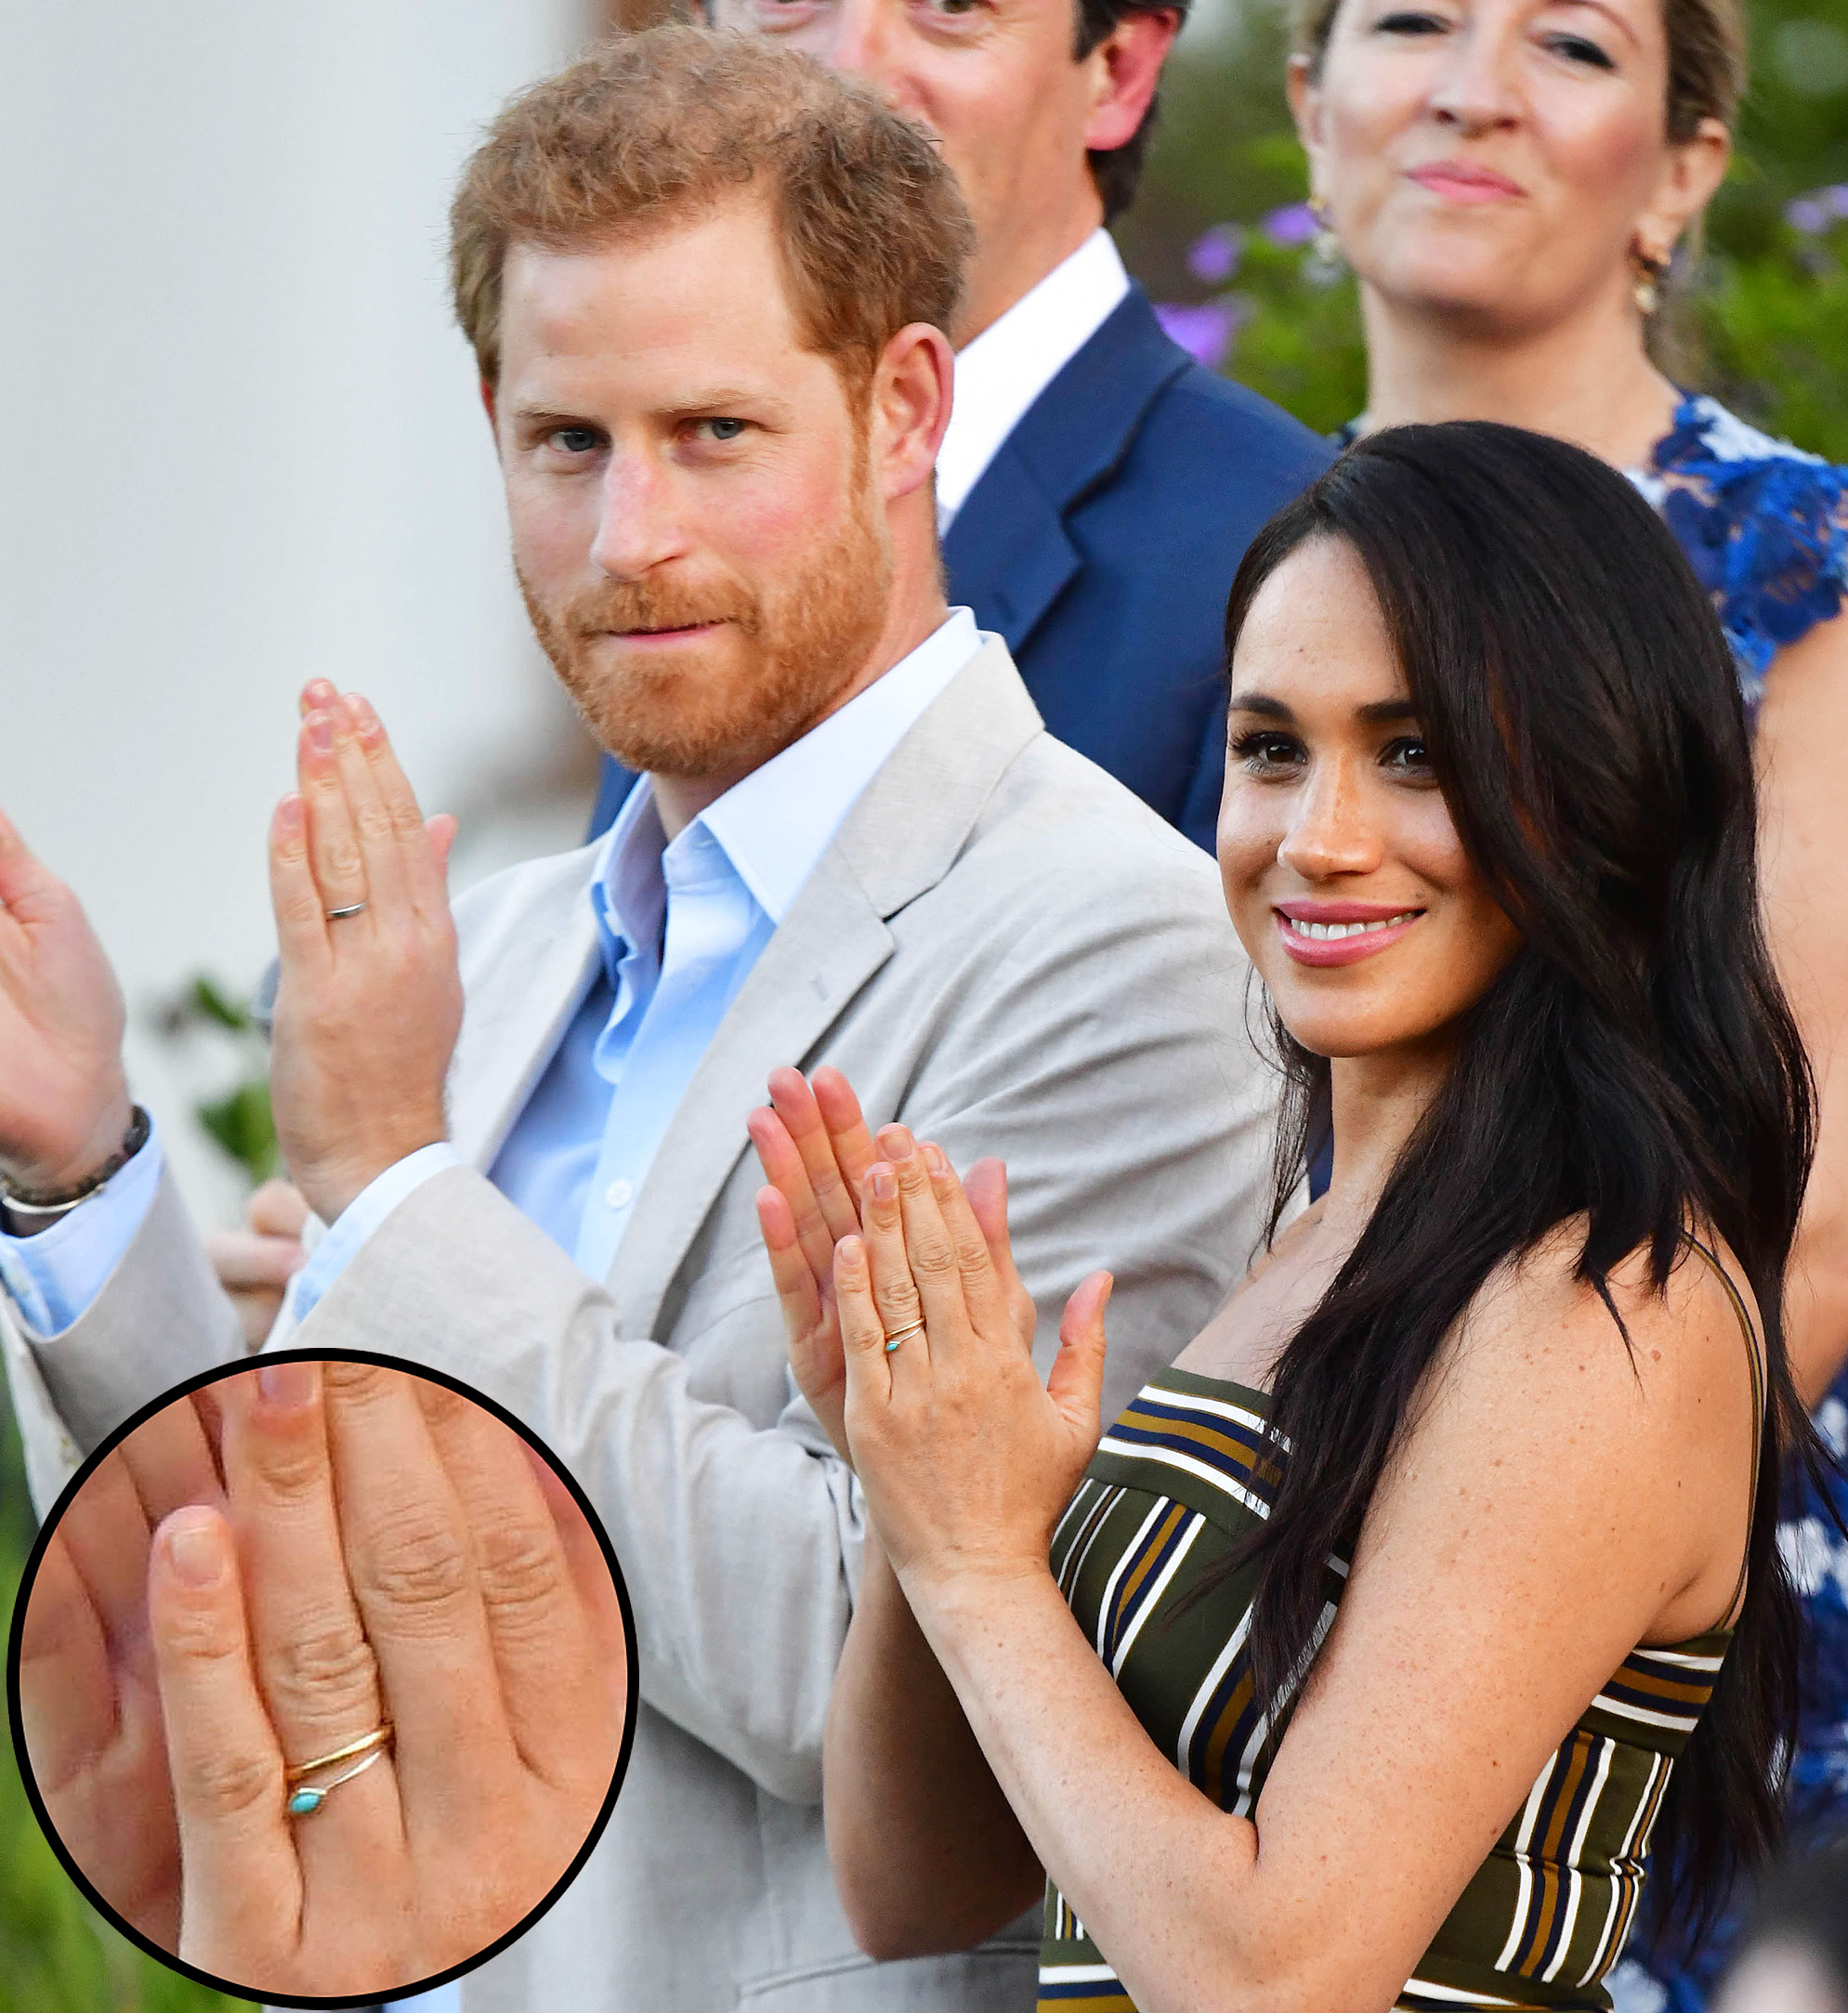 Meghan's engagement ring features Diana's diamonds